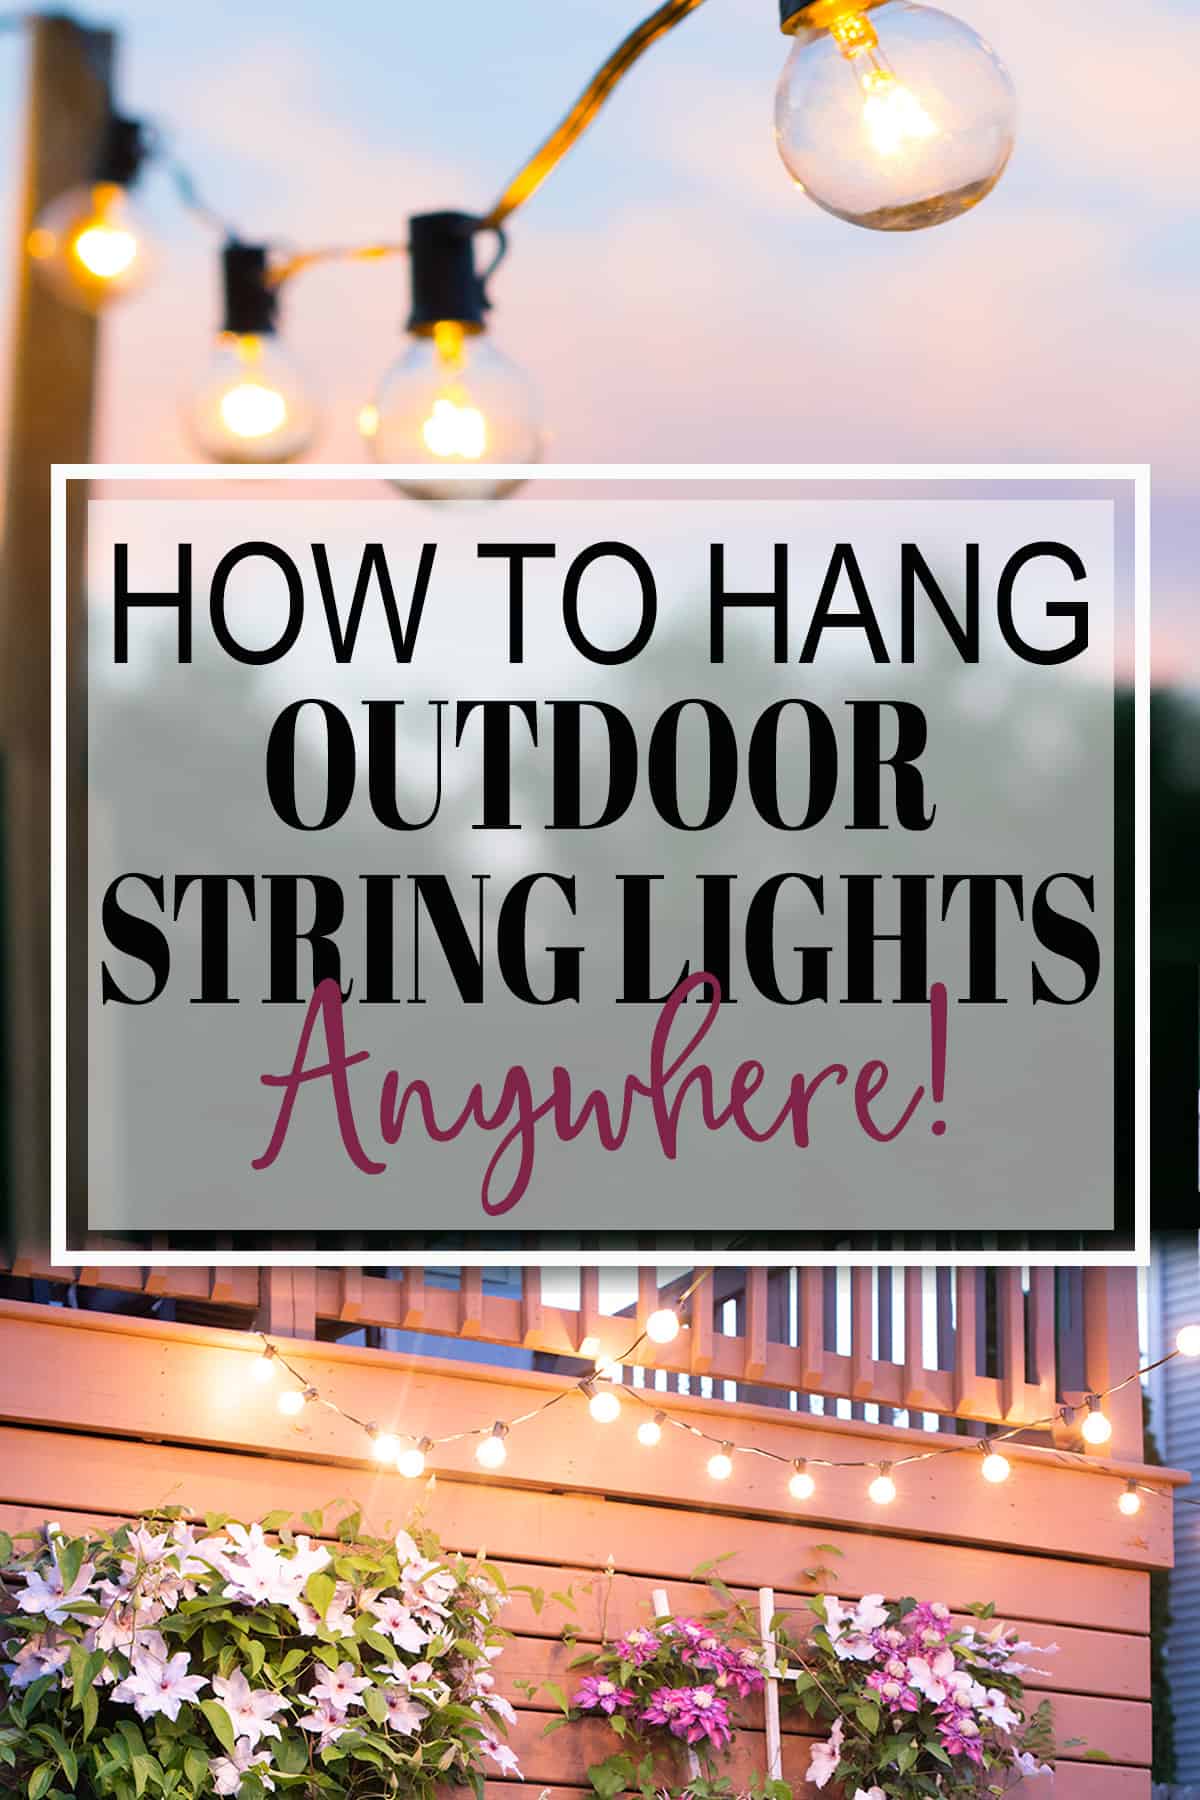 String lights being hung from a deck with title overlay.